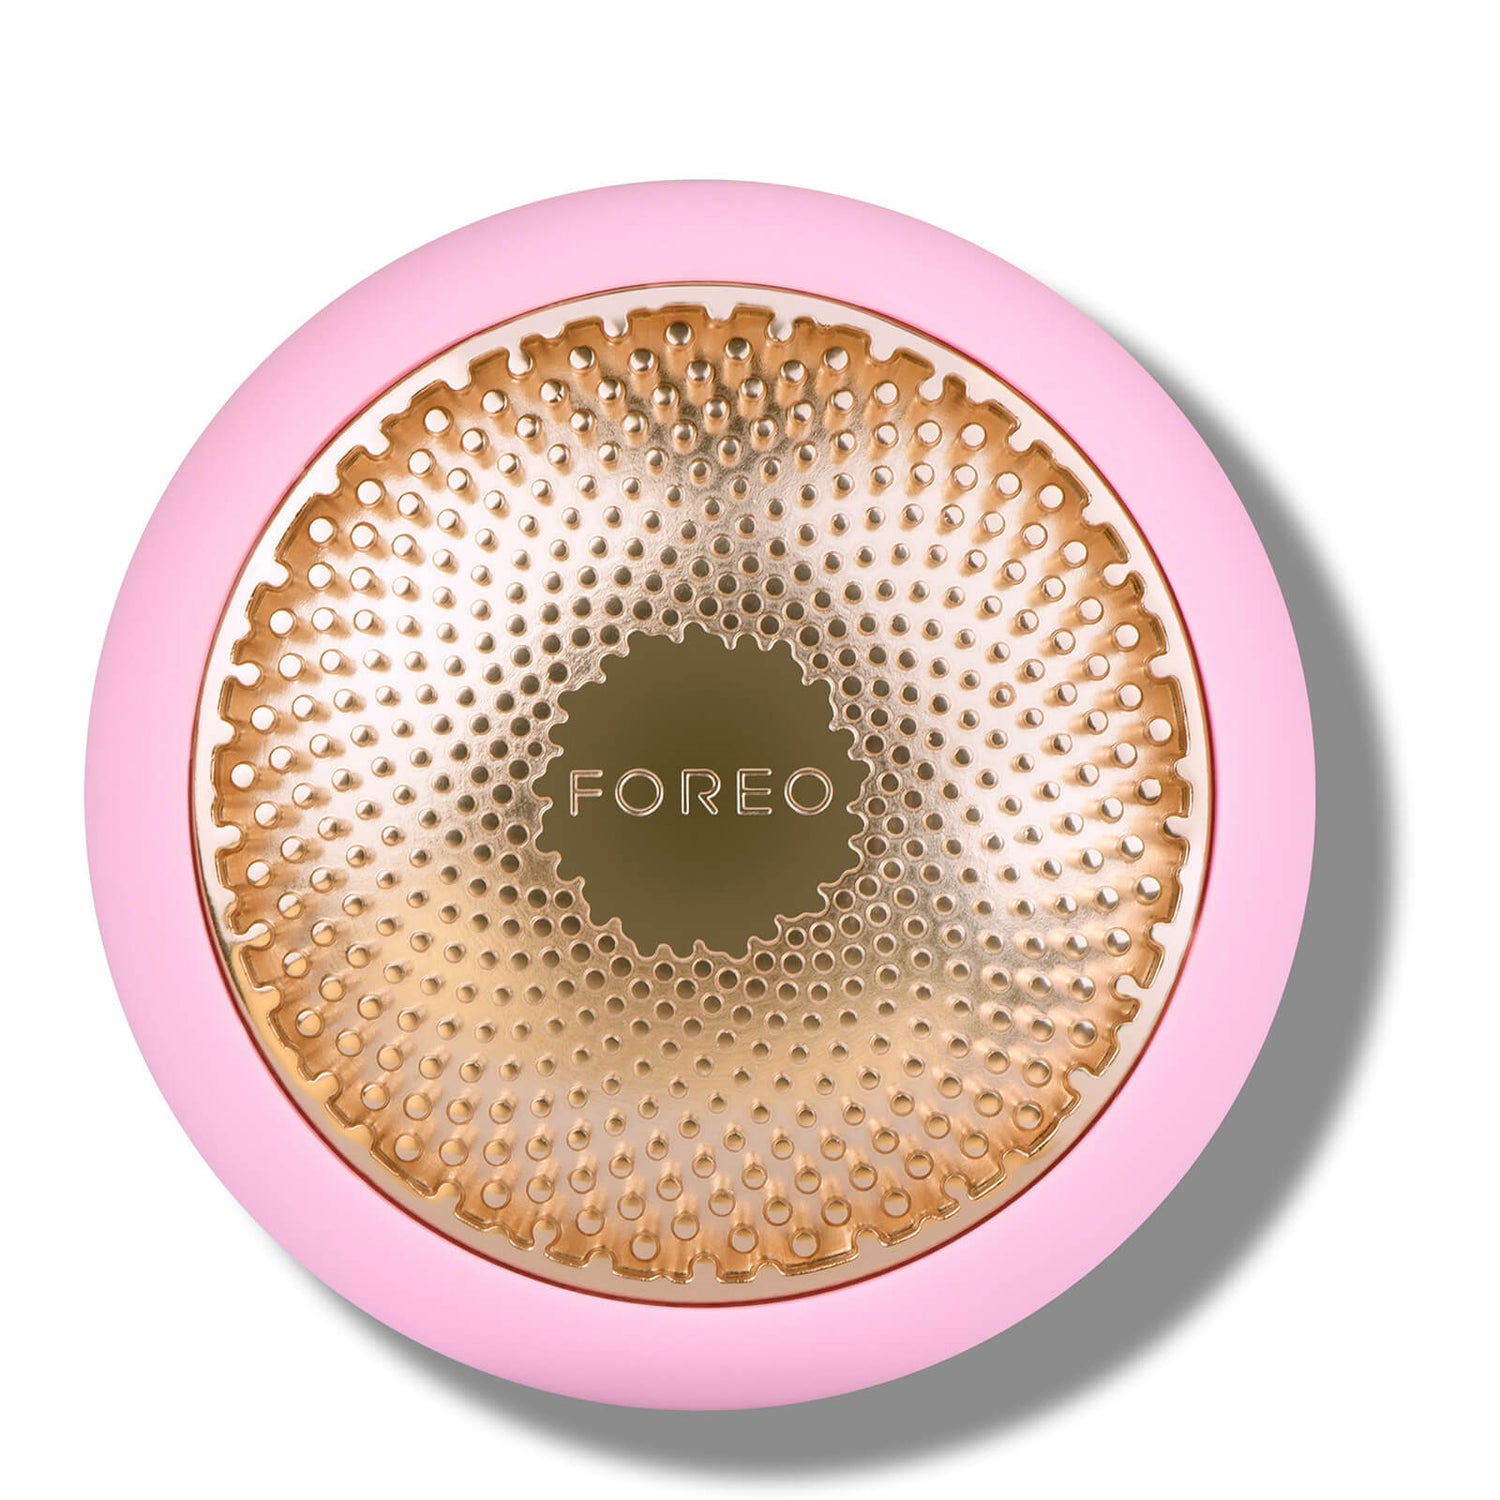 FOREO UFO 2 Device for an Accelerated Mask Treatment (Various Shades)